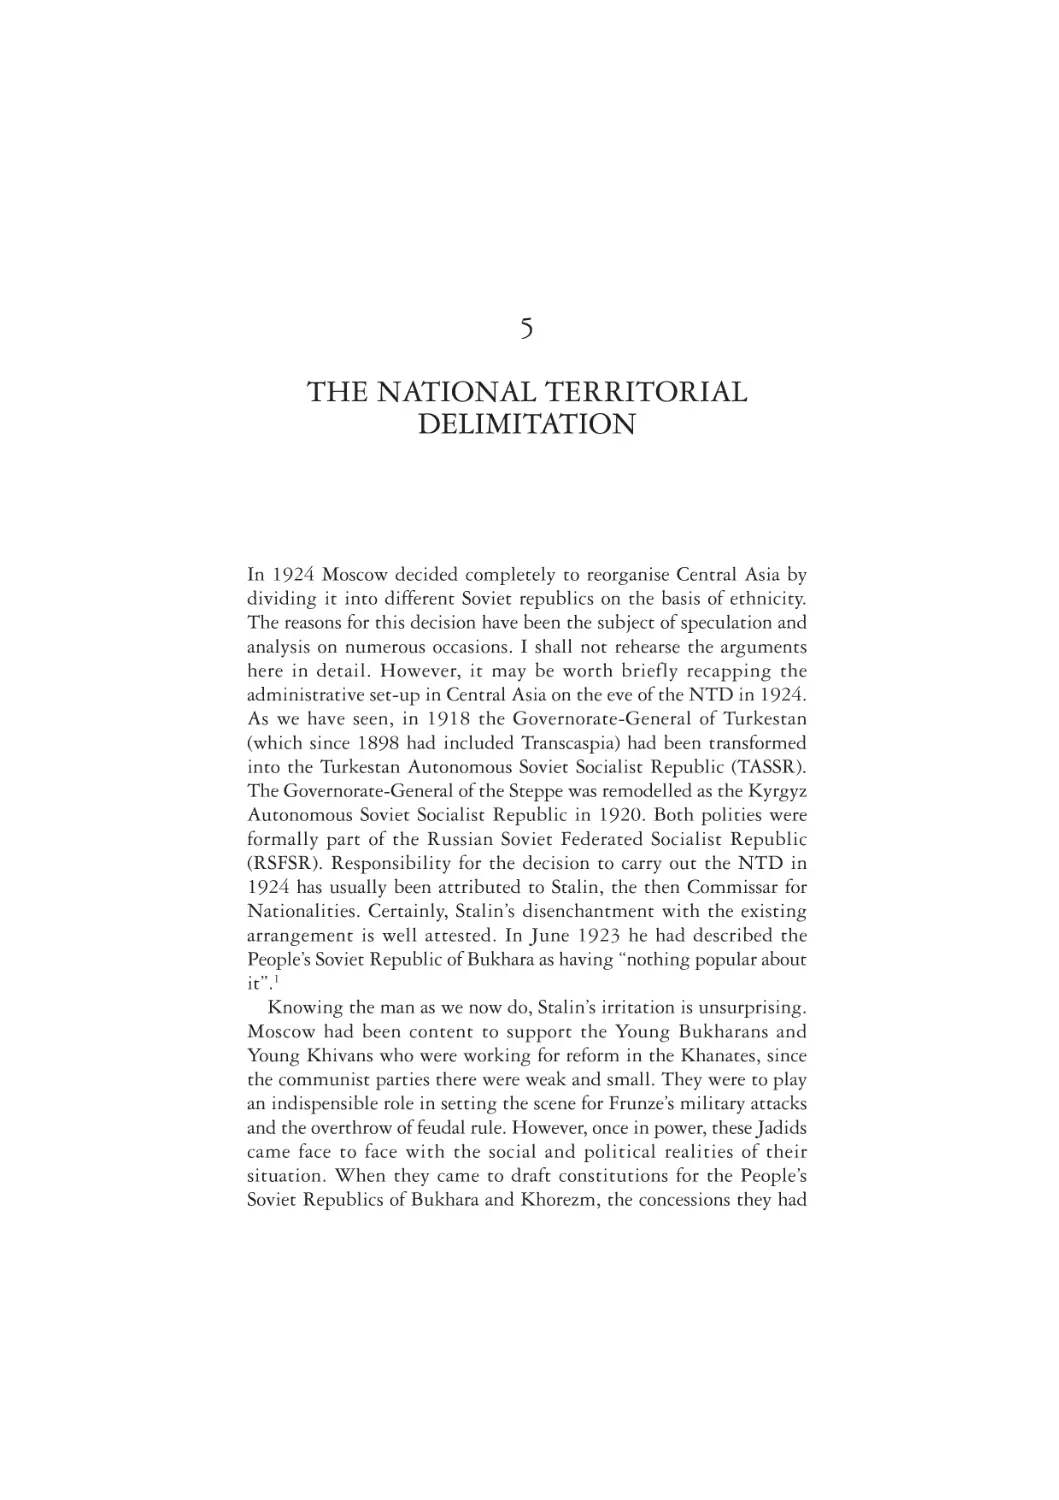 5. The National Territorial Delimitation